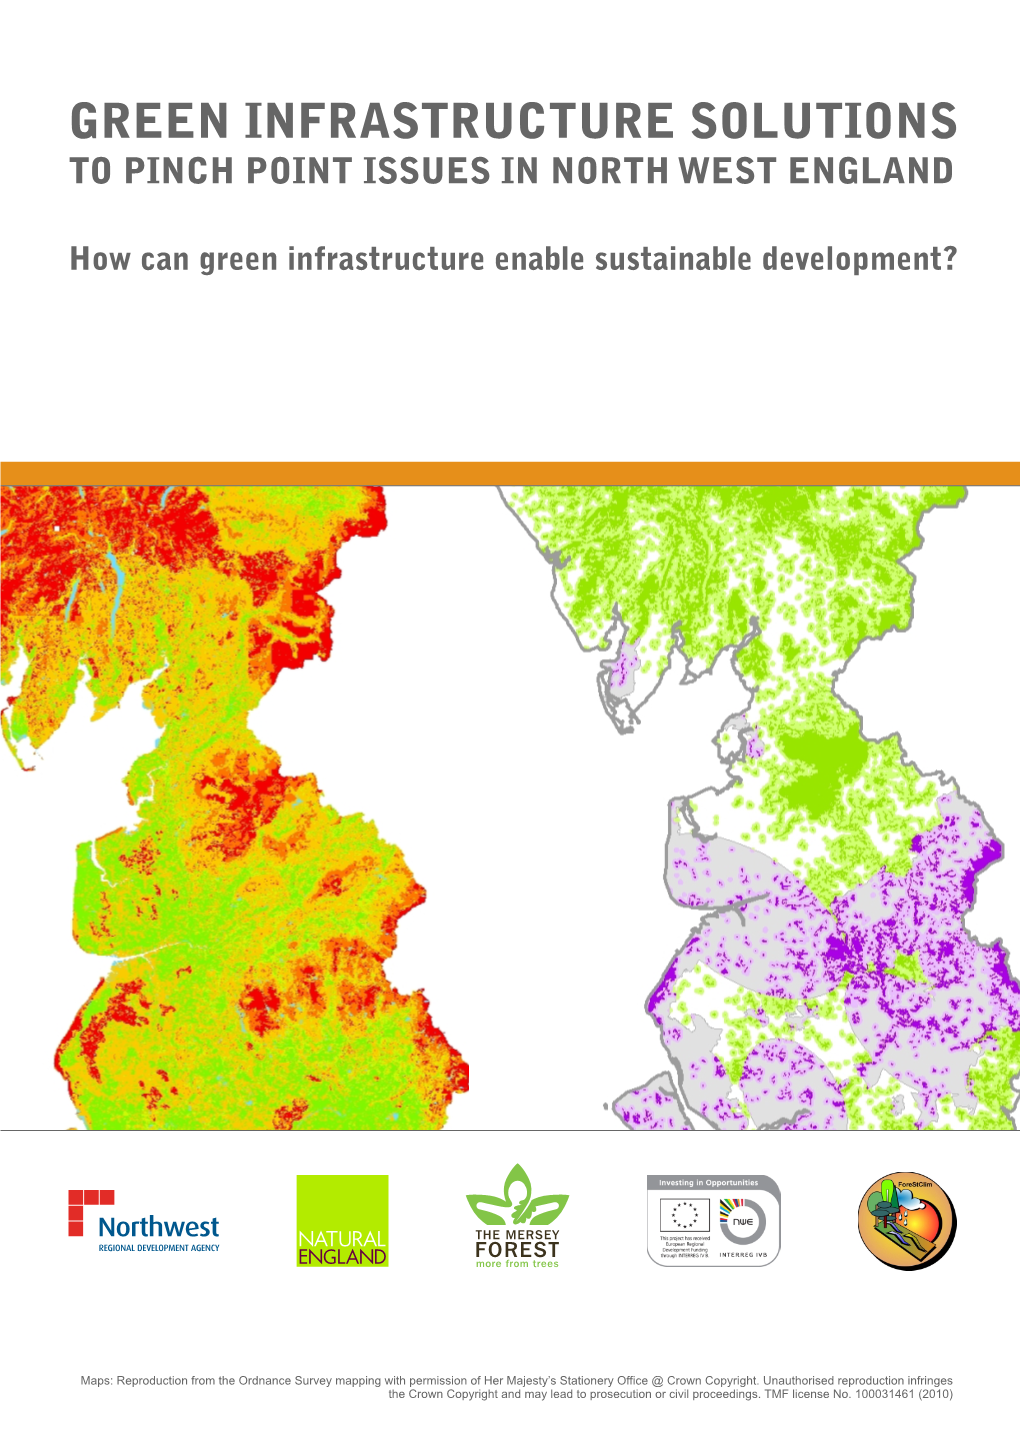 Green Infrastructure Solutions to Pinch Point Issues in North West England